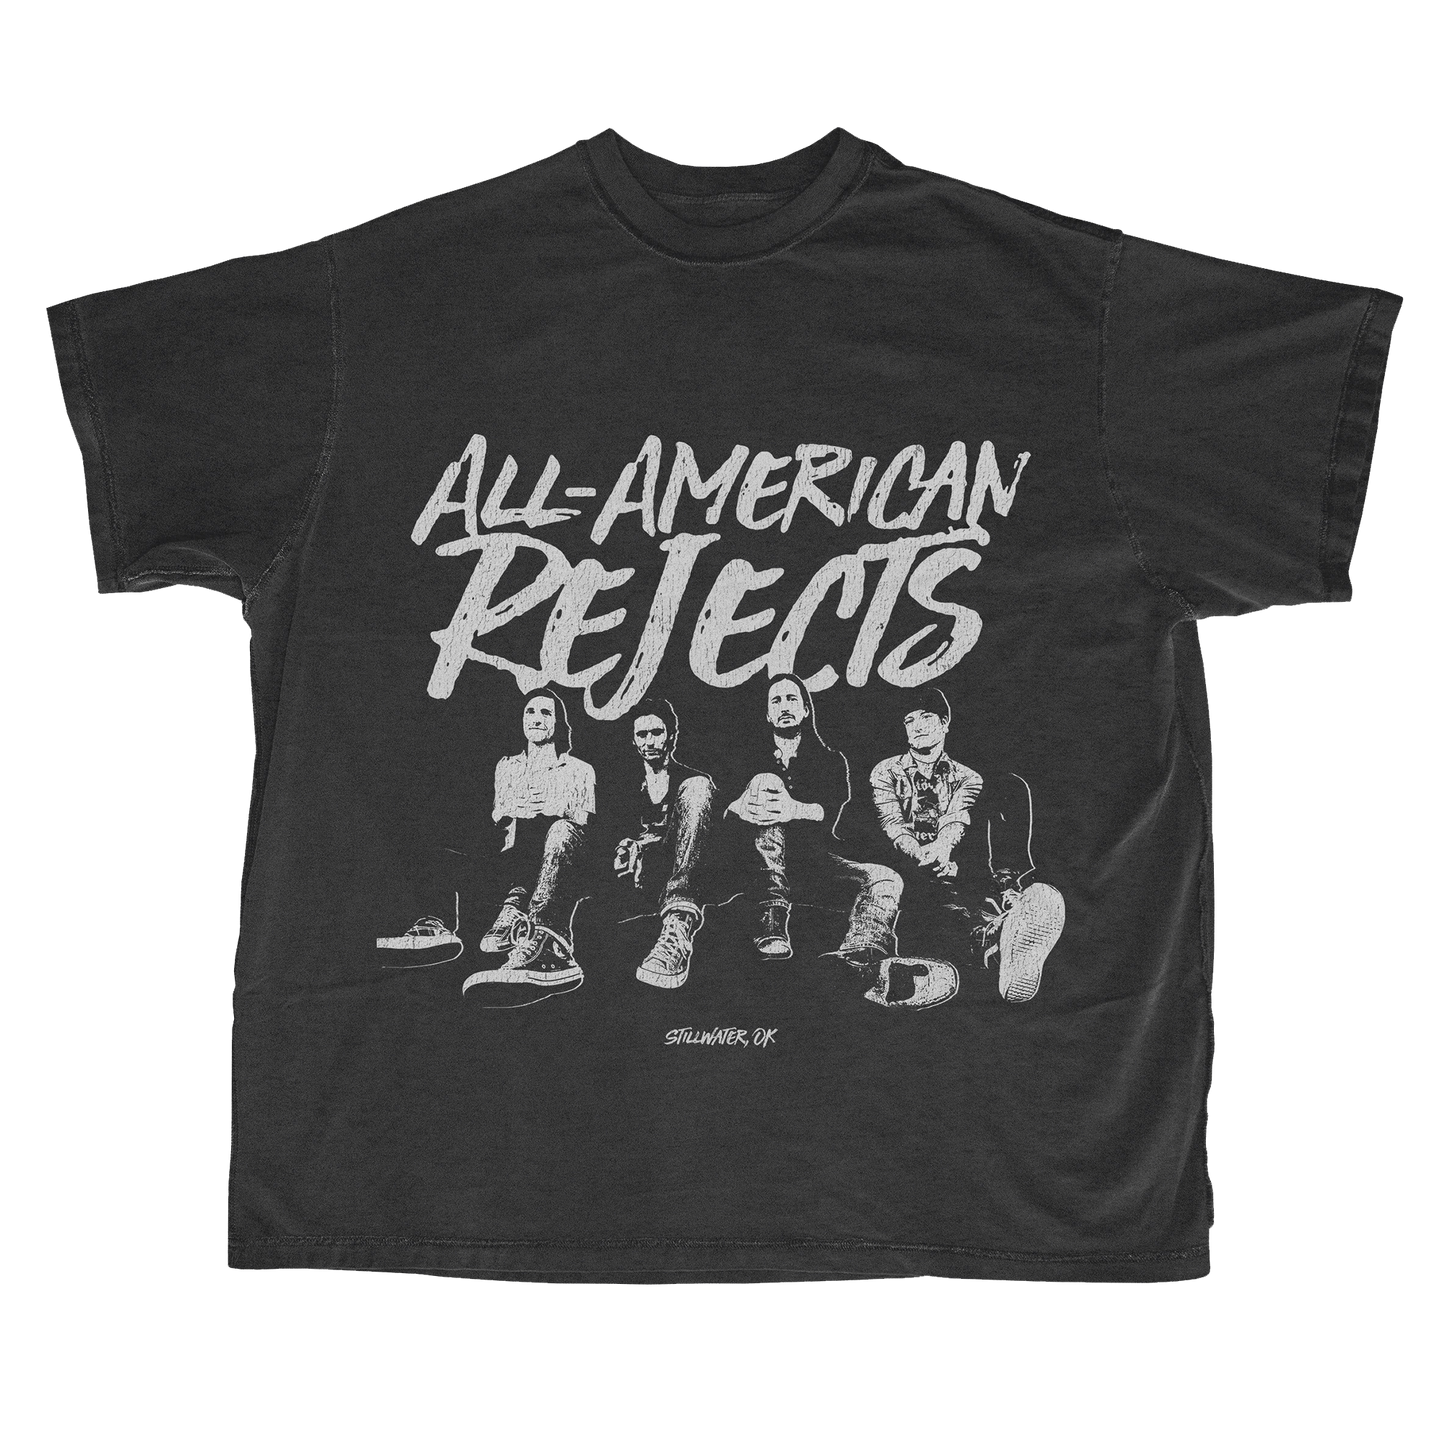 All American Rejects black and white photo tee